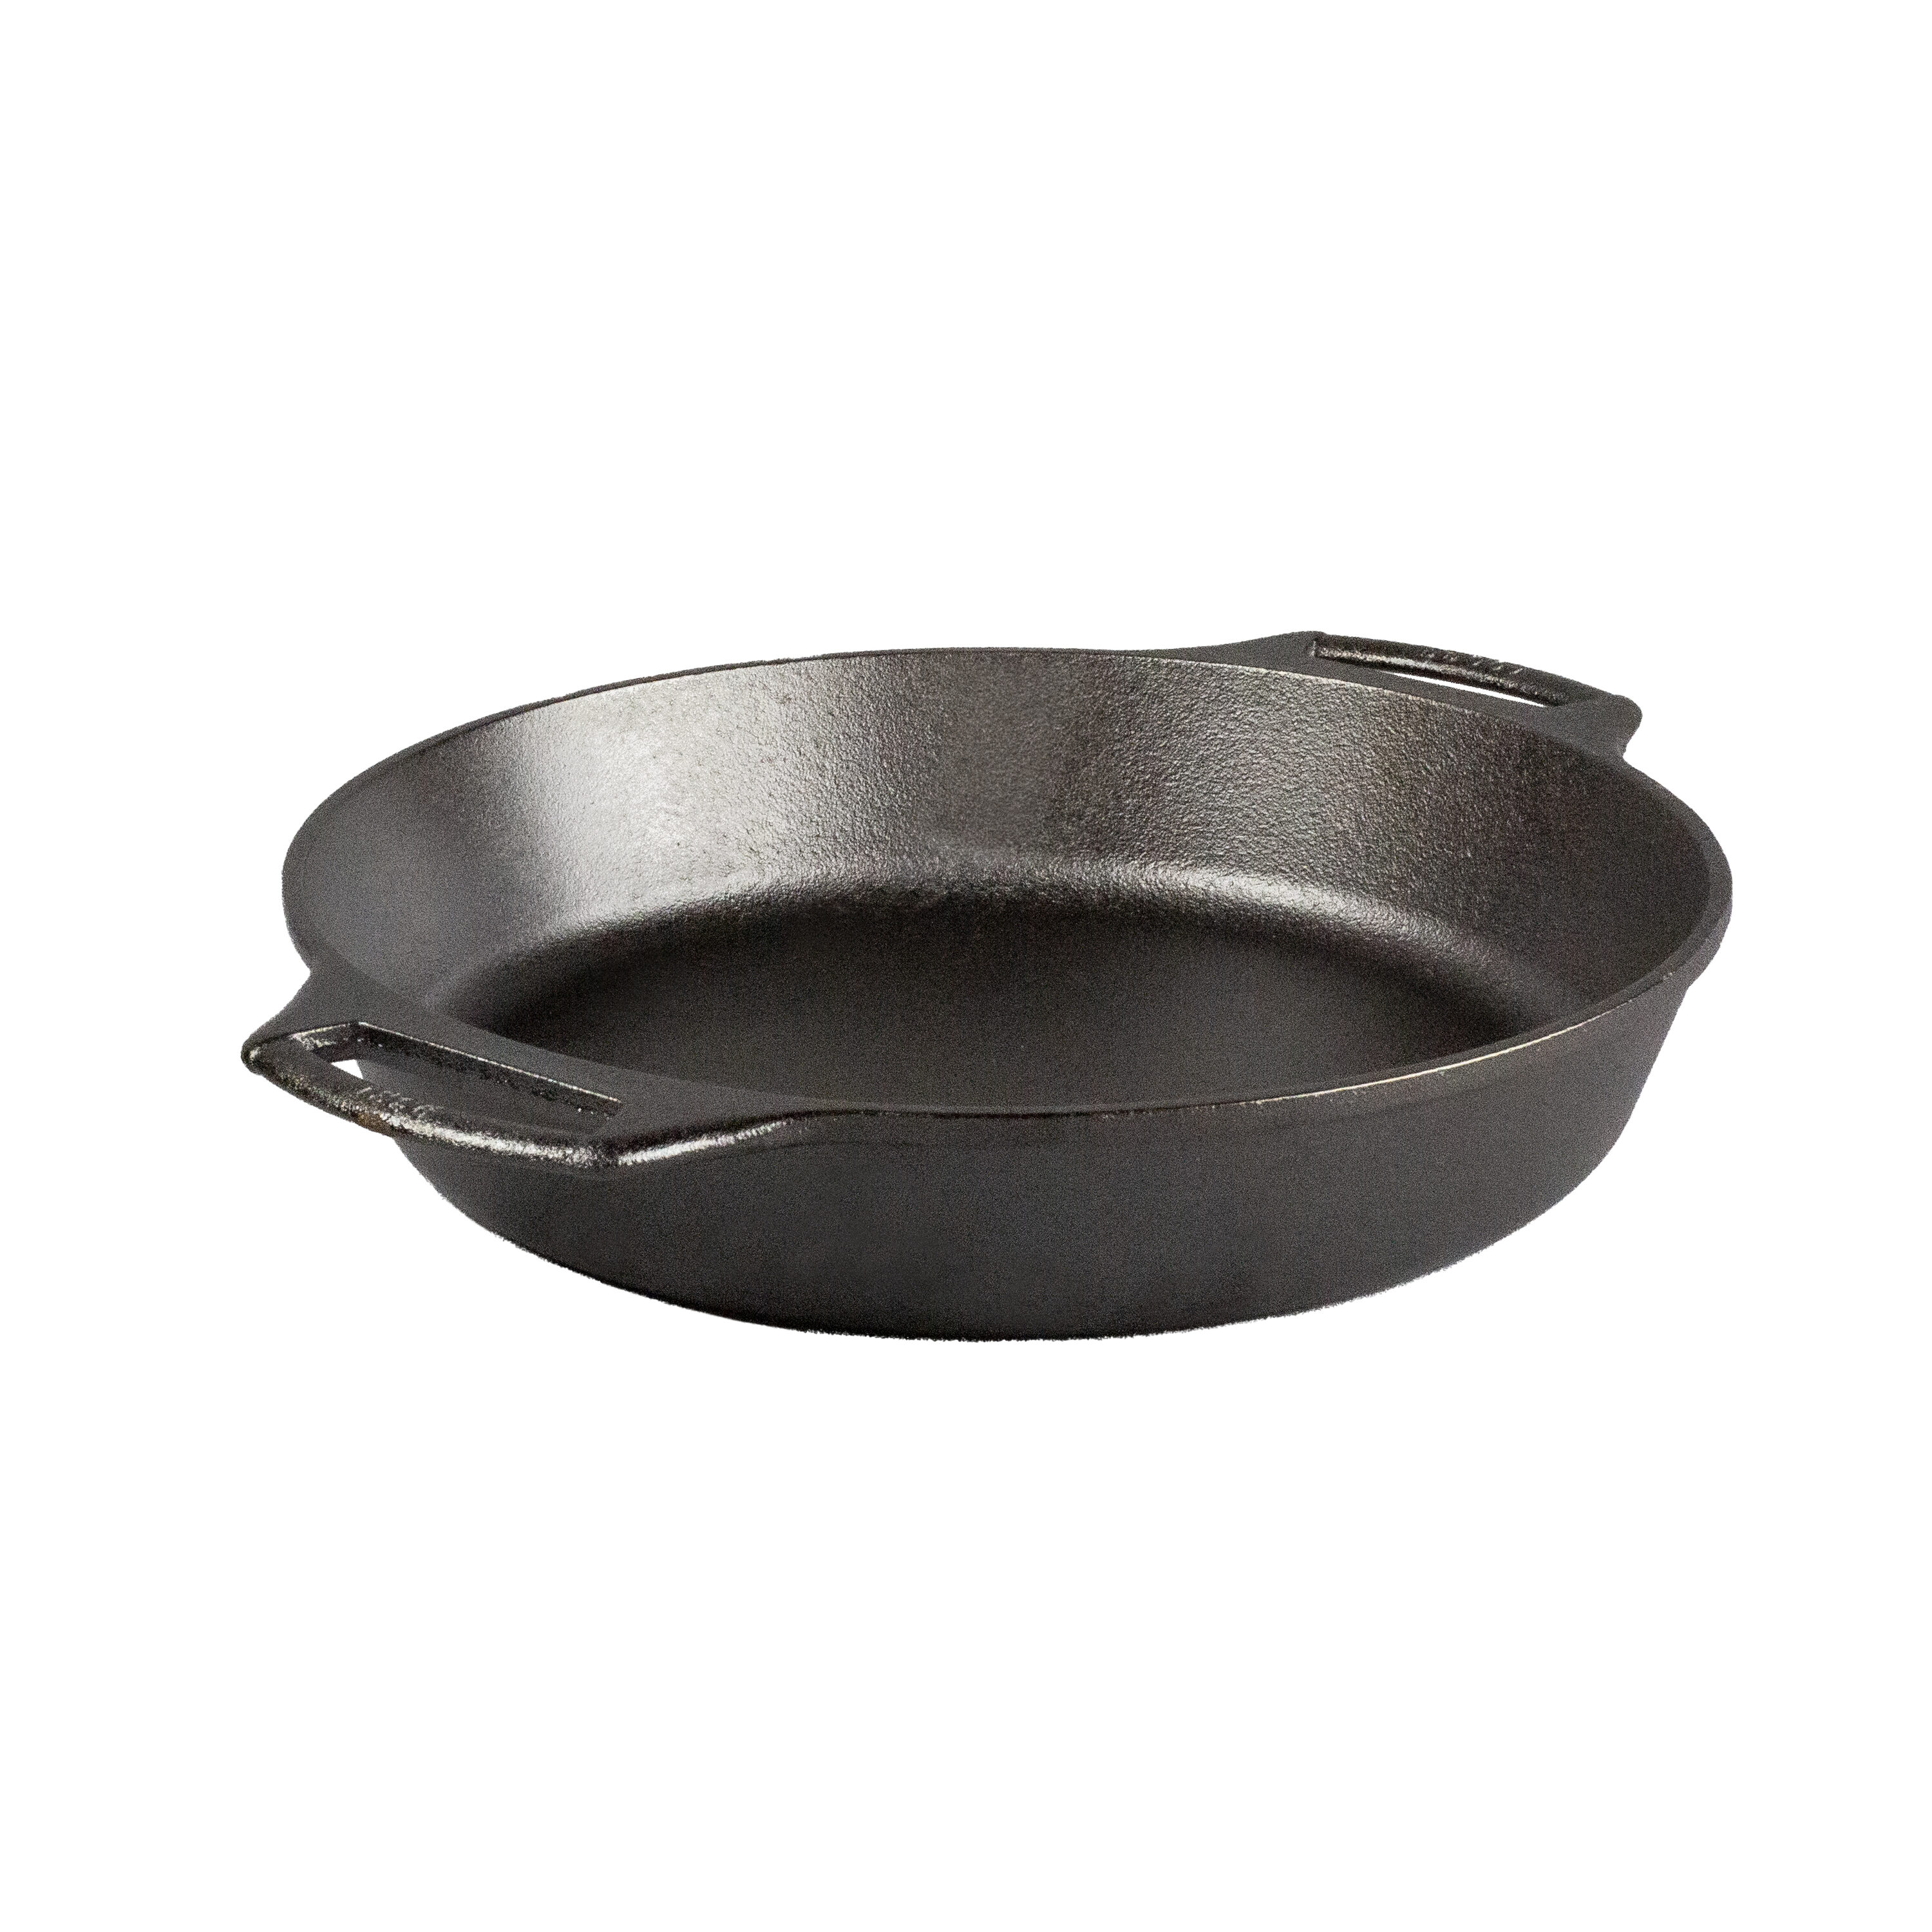  Lodge Seasoned Cast Iron Cookware Set. 2 Piece Skillet Set.  (10.25 inches and 6.5 inches): Home & Kitchen